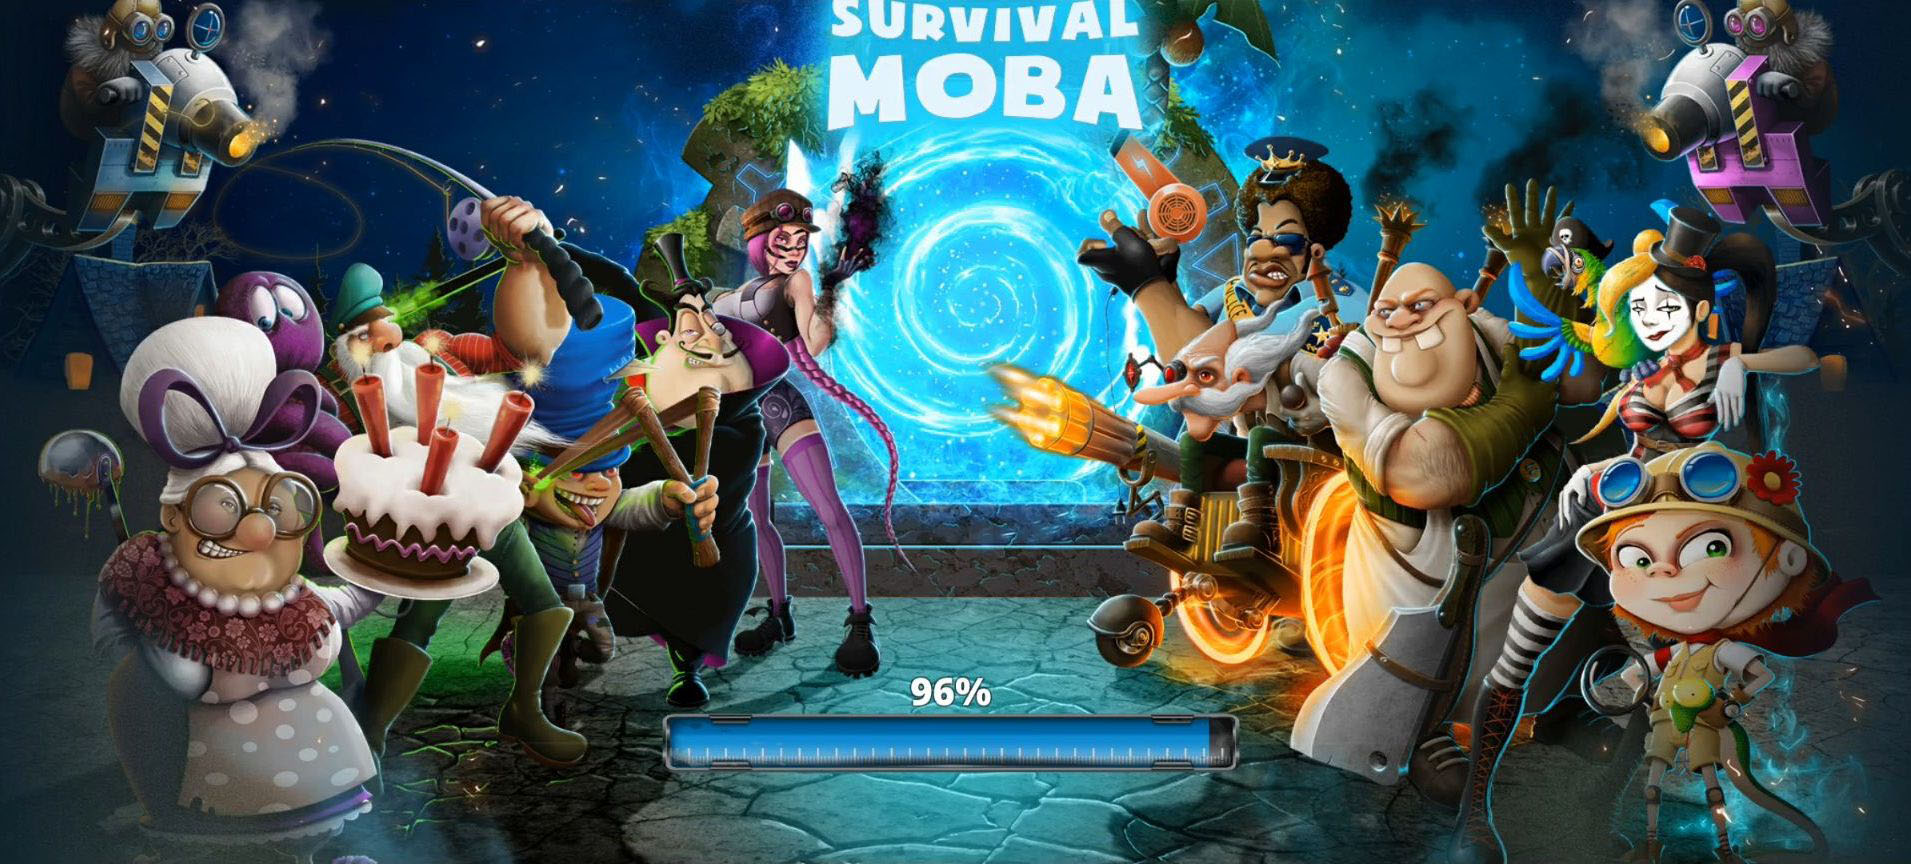 Survival MOBA for Android